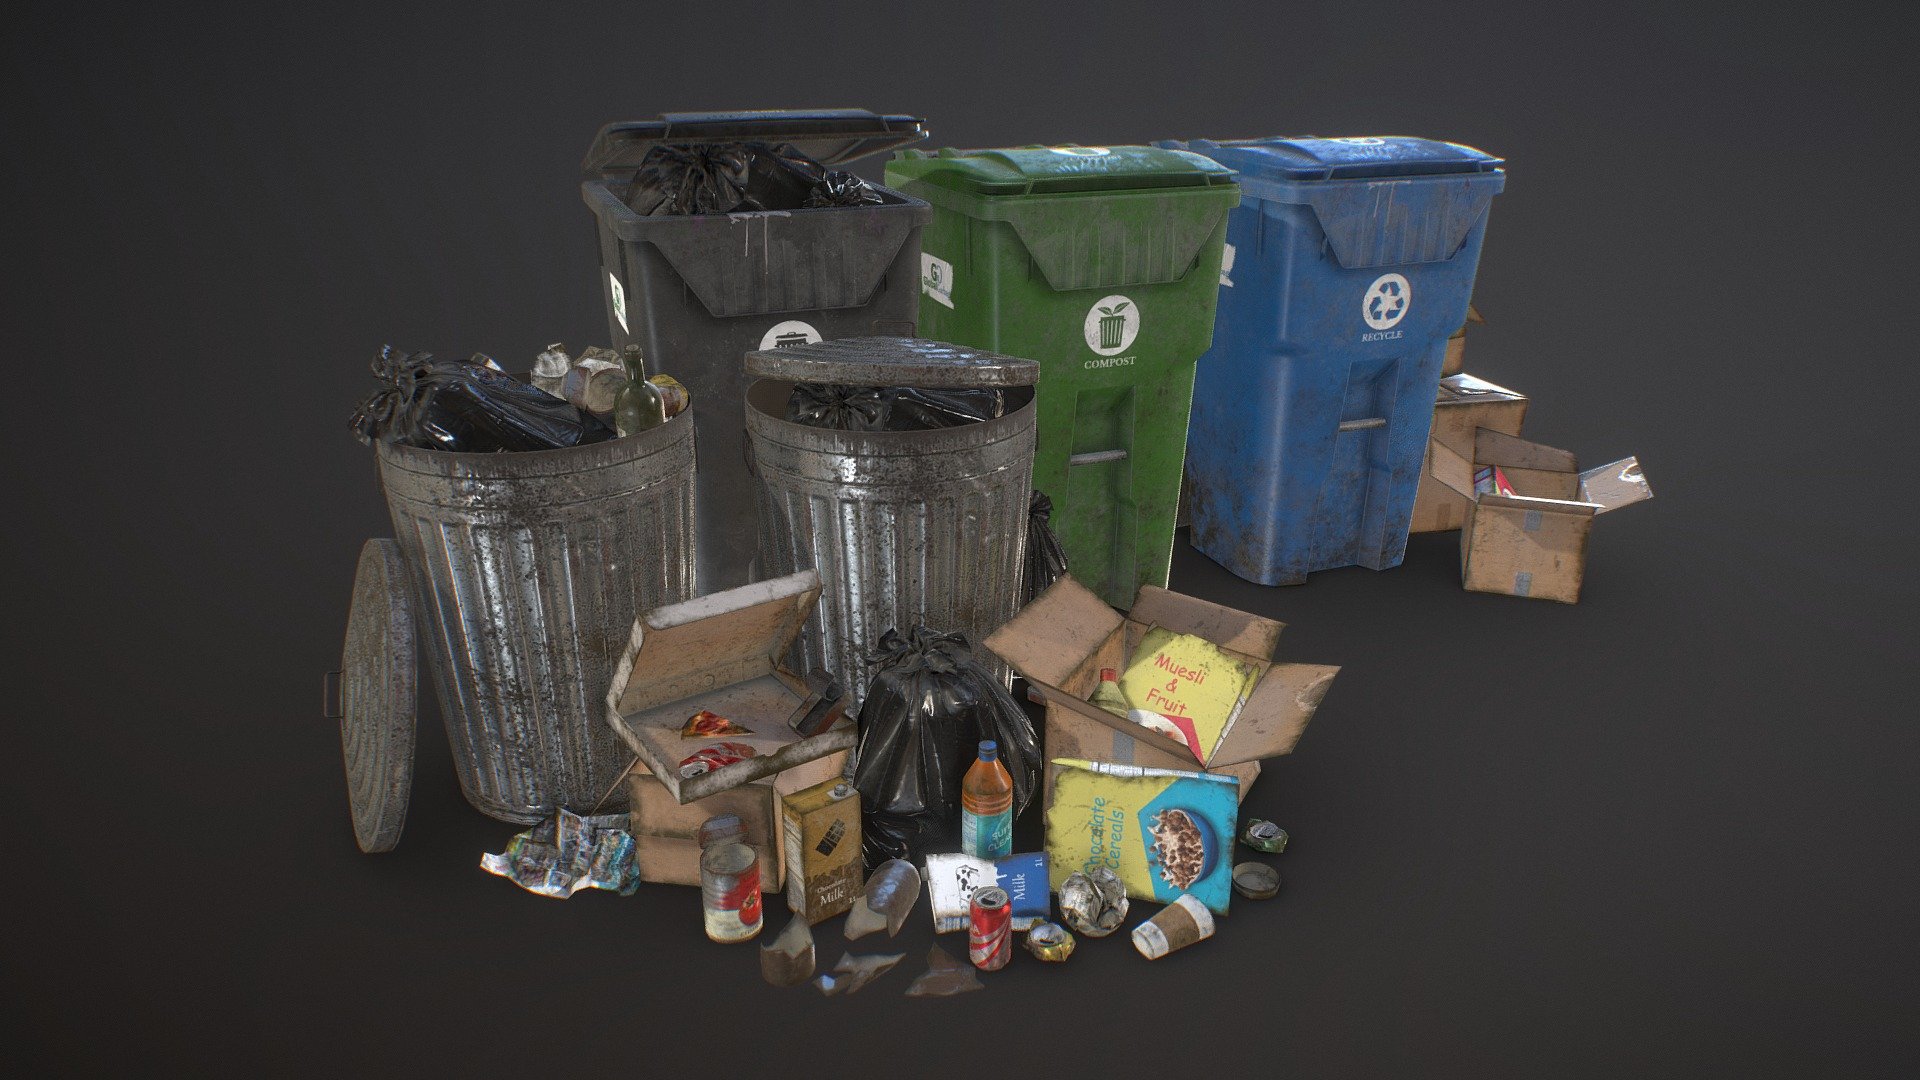 Low Poly pack of game ready models of Urban Trash with PBR textures:

4k textures (1 set for all small props / 2 different levels of dirt, 1 for Garbage Bags / 3 different colors, 1 for Trash Can / 2 levels of dirt and 1 for Trash Bins / 3 colours / 2 levels of dirt)

Textures: Albedo, Normal, Metalness, Roughness, AO, Opacity

This pack includes: 




Trash Cans

Trash Bins

Urban Trash: 3 carboard boxes - 2 cereal boxes - 3 cartons of milk - 4 papers / 4 levels of crumpling - 4 types of tins - 1 coffee cup - 2 wine bottles - 2 broken bottles - 3 soda cans with 4 levels of crushing - 2 plastic bottles - 1 pizza box - piece of pizza

2 Garbage Bags

Polys of kit: 31086 / Polys of scene: 17407

2 files included: 




Urban Trash Pack Vol2 Scene - Objects represented as seen in renders

Urban Trash Pack Vol2 Kit - All objects included

Also included in Trash Pack Vol 3

This model can be used for any game, personal project, etc. You may not resell any content

 - Urban Trash Pack Vol 2 - Low Poly - Buy Royalty Free 3D model by MSWoodvine 3d model